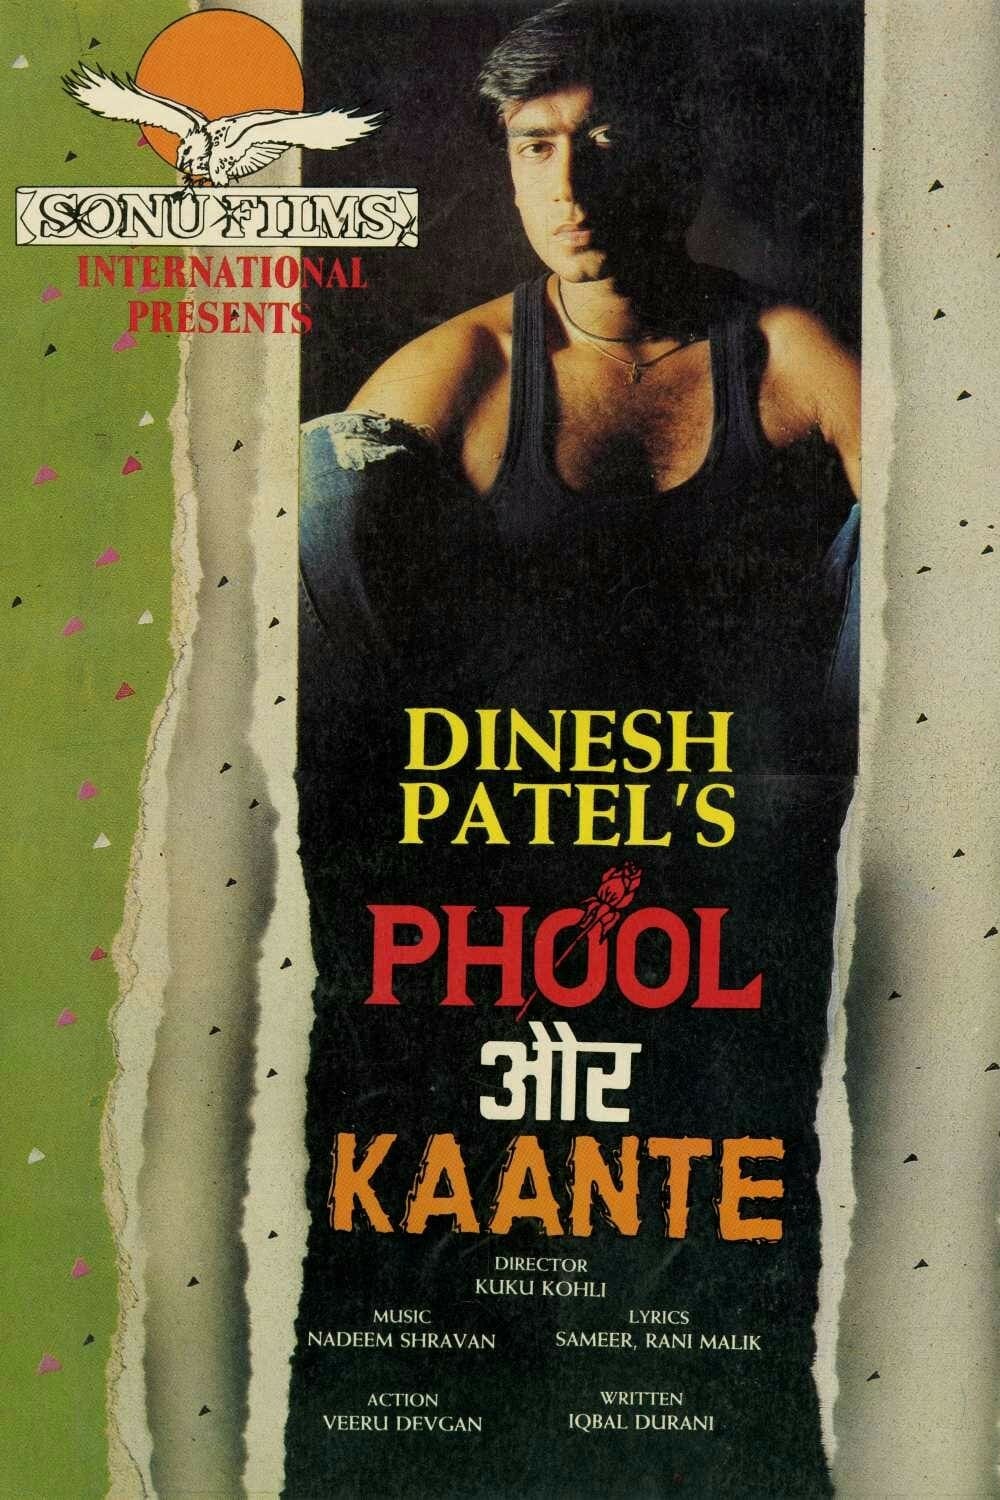 Poster for the movie "Phool Aur Kaante"